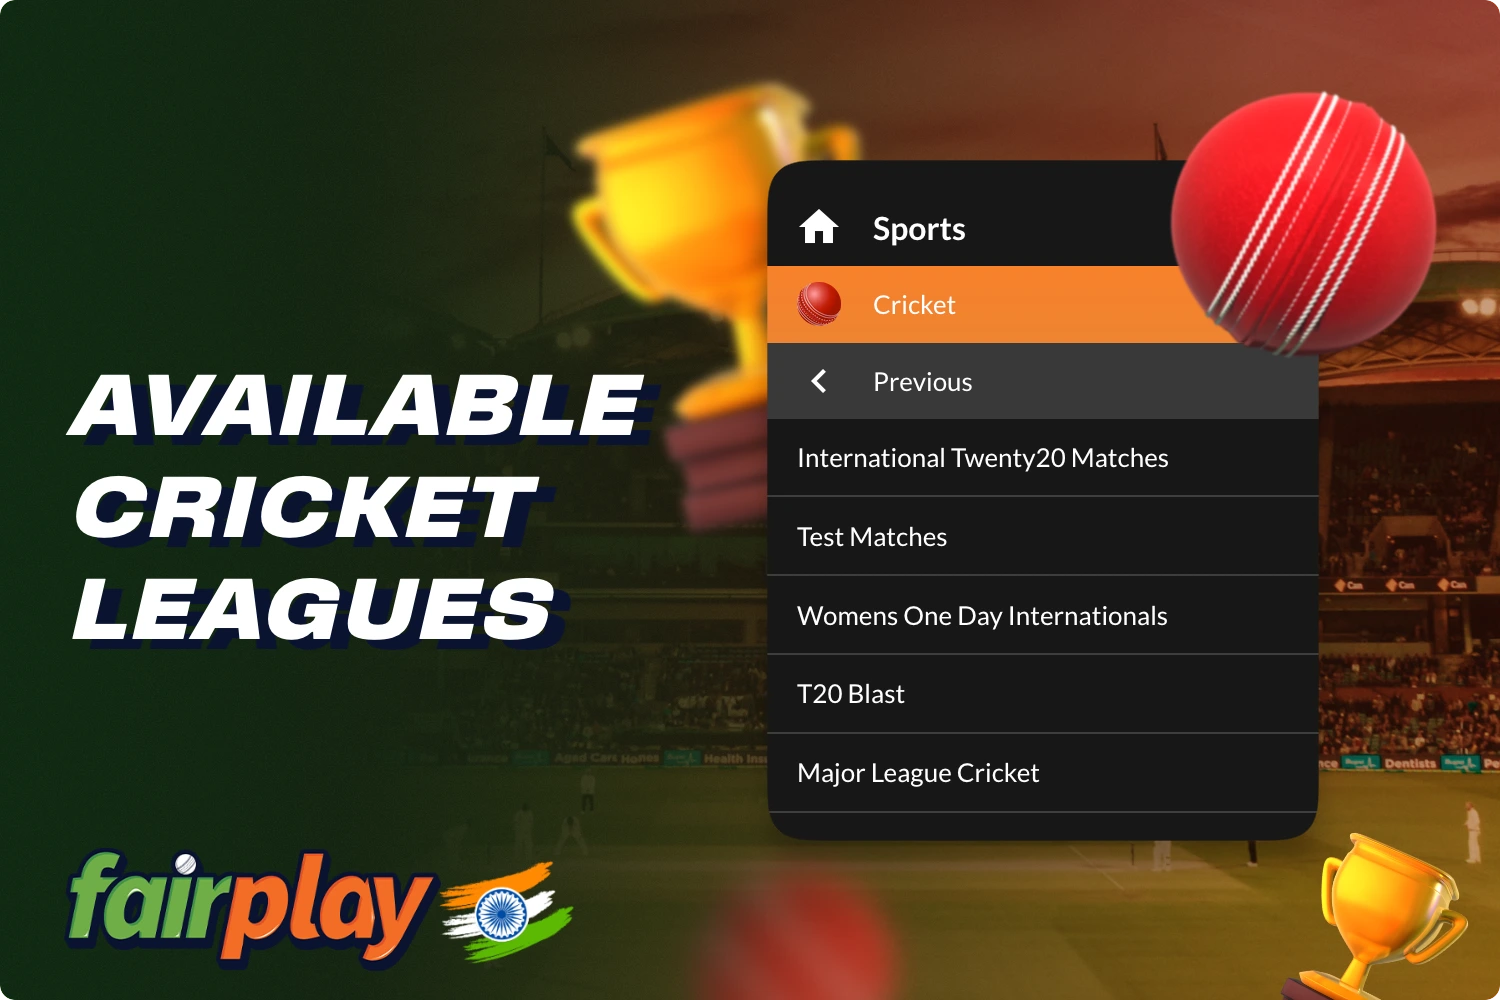 There are several cricket leagues available for Indian users to bet online on at the Fairplay platform